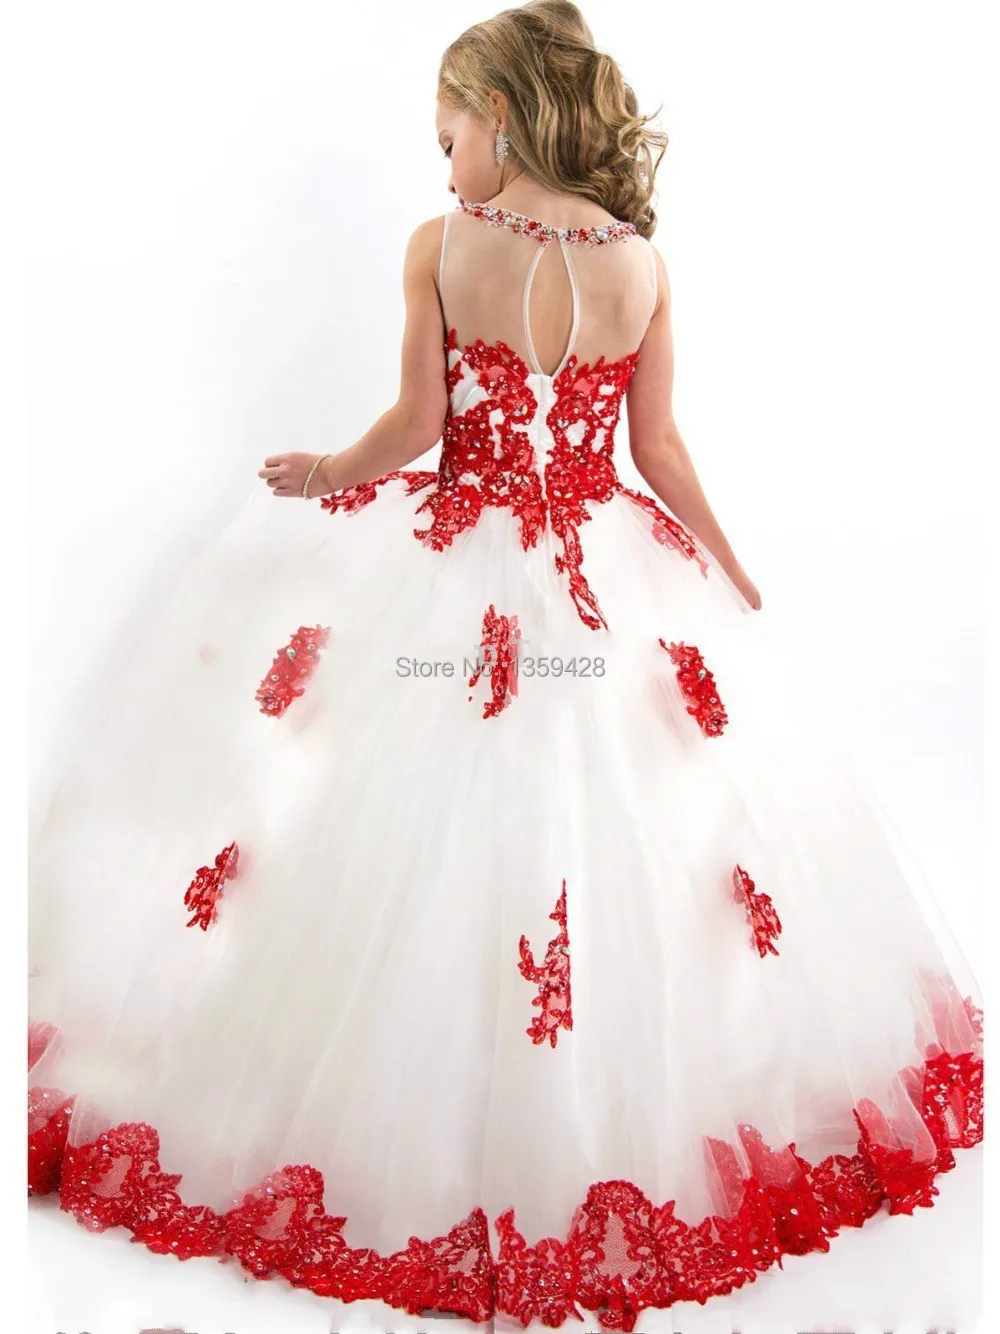 High Quality Sleeveless Scoop First Communion Dresses For Girls Appliques Cute Wedding Flower Ball Gowns Pageant Princes | Свадьбы и